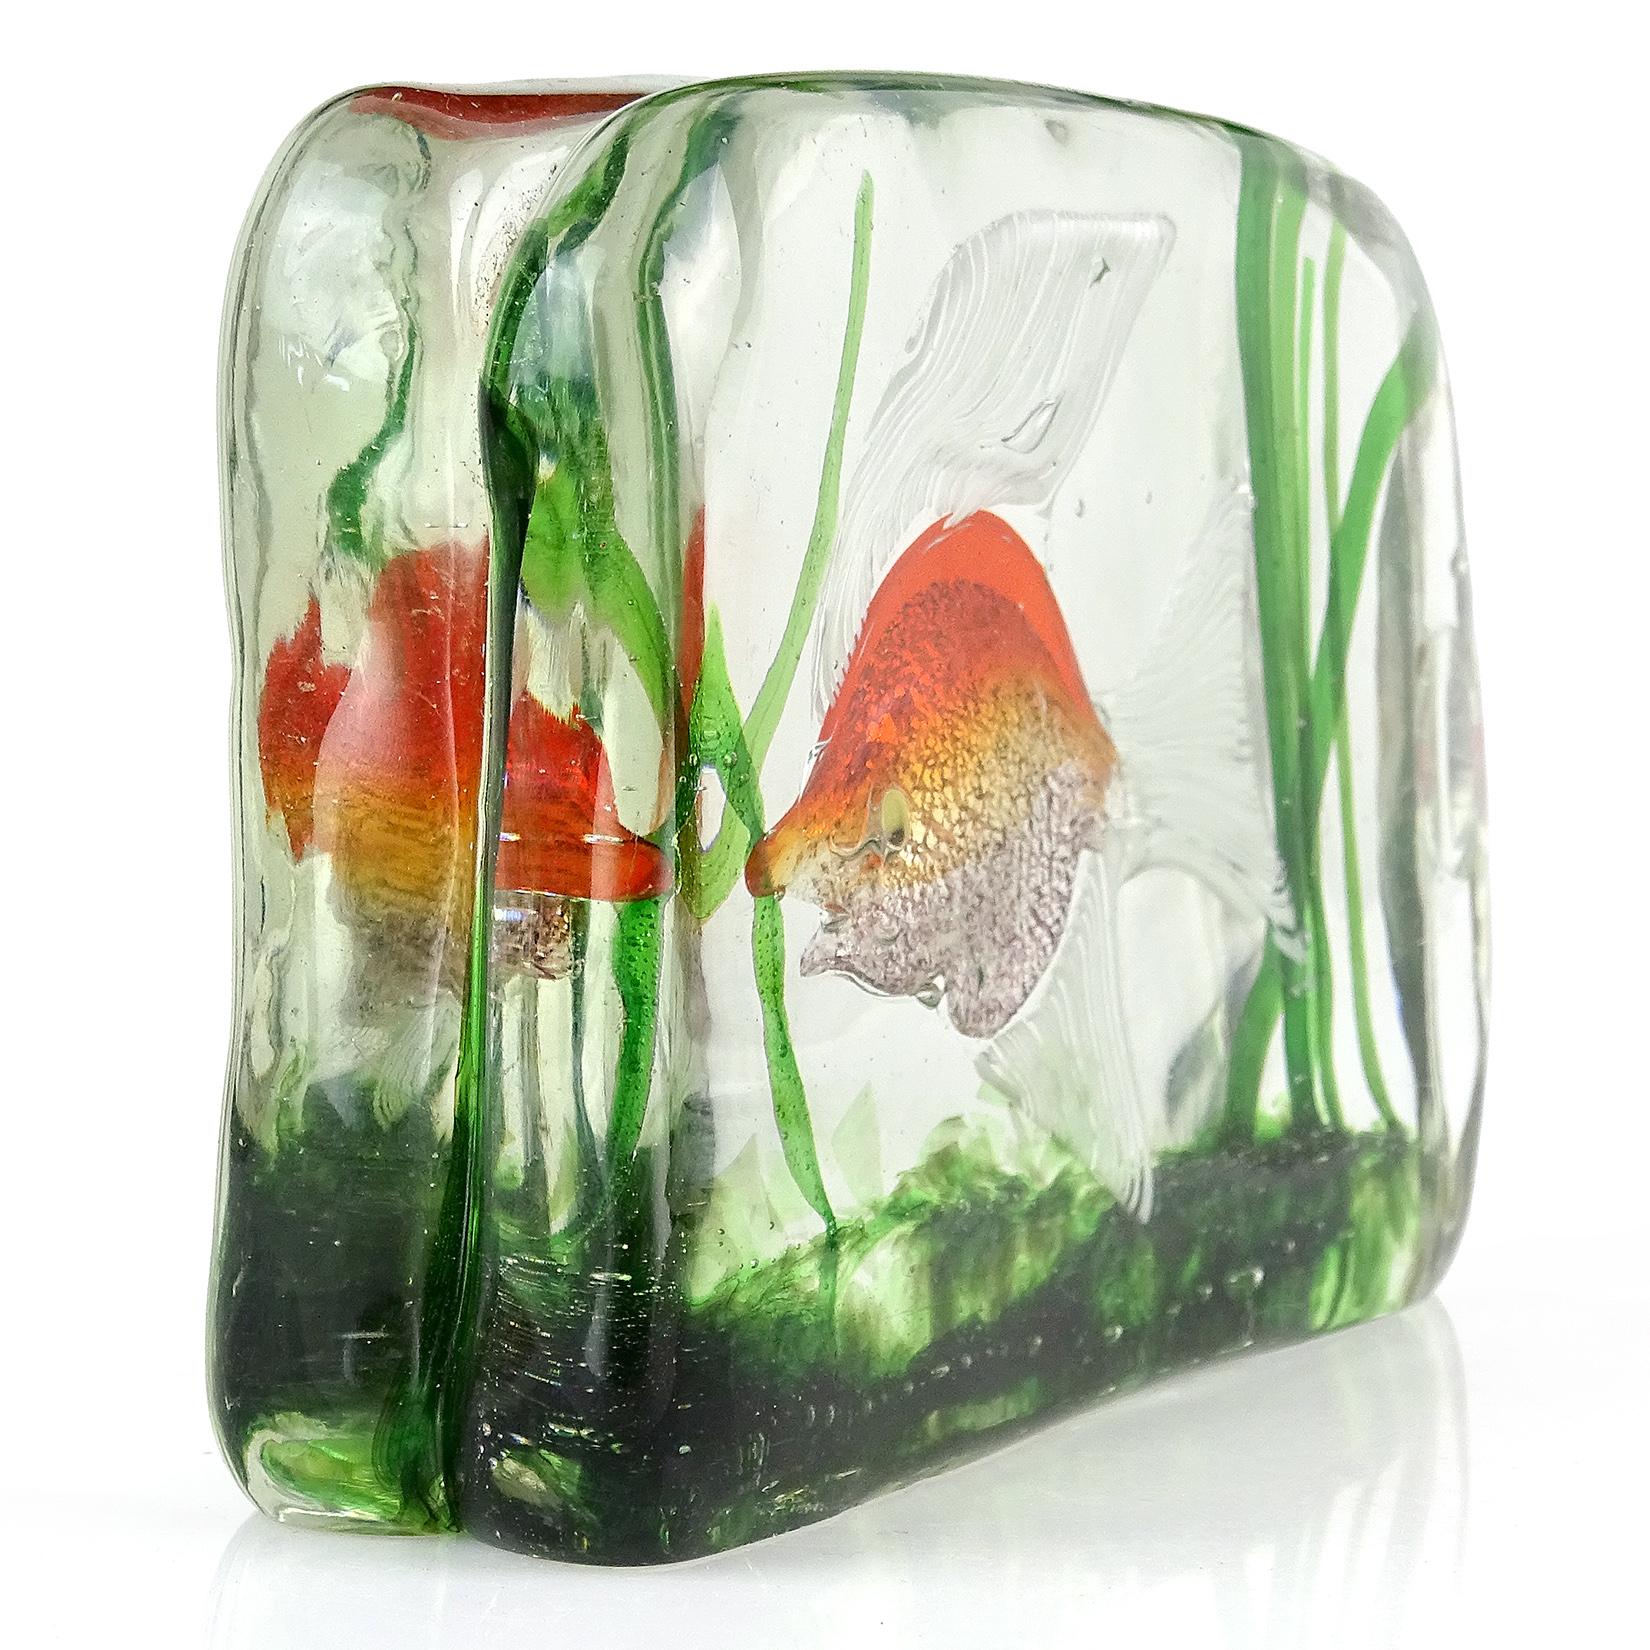 Beautiful vintage Murano hand blown orange and silver flecks fish Italian art glass aquarium sculpture. Documented to the Cenedese Company, and attributed to designer Alfredo Barbini. The fish has ribbon fins in white, swimming among green algae.